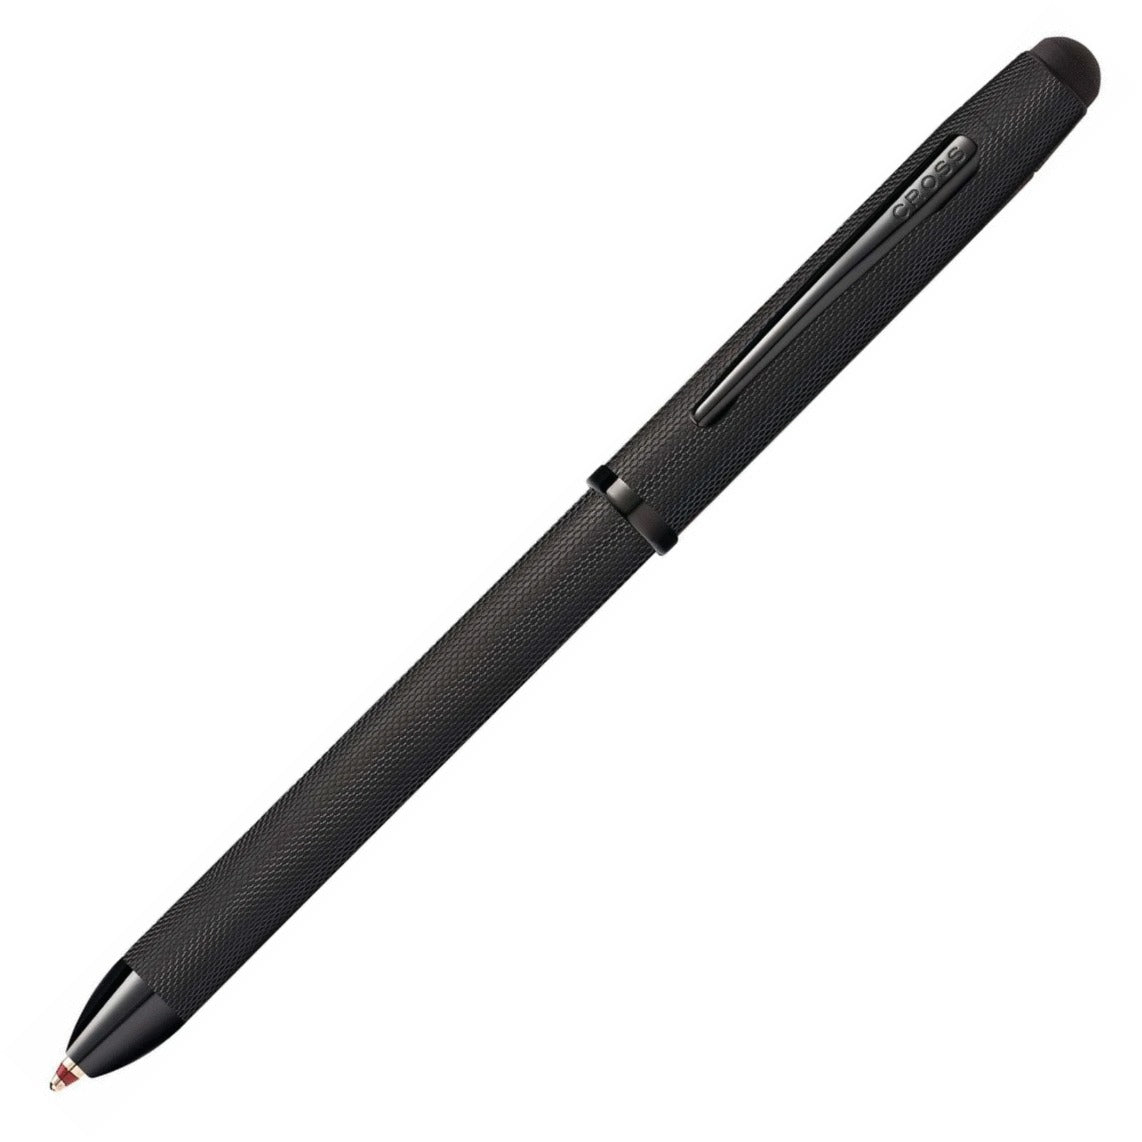 Cross Tech3 Brushed Black PVD MultiFunction Pen | AT0090-19 | Pen Place